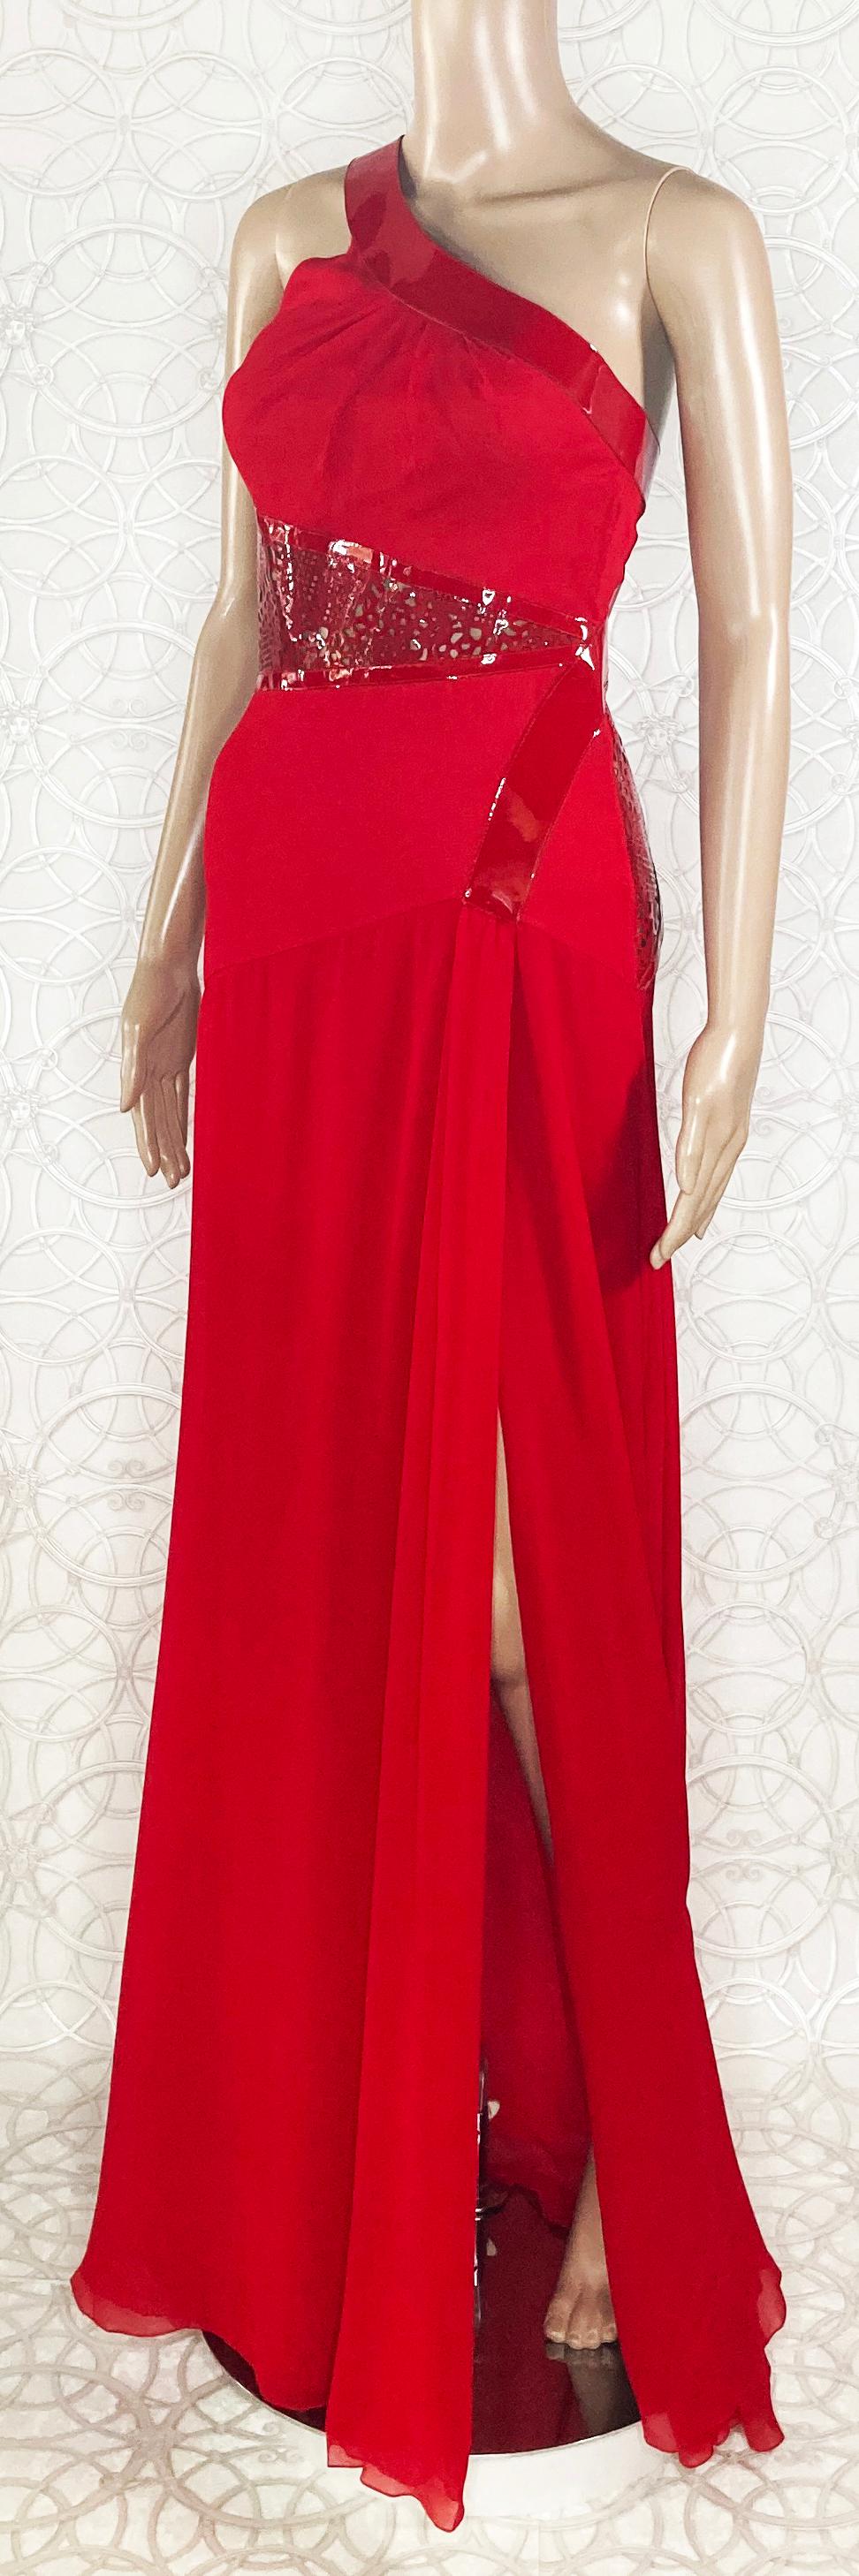 VERSACE RED SILK EVENING LONG GOWN DRESS w/PATENT LEATHER INSERTS 38 -2 For Sale 3